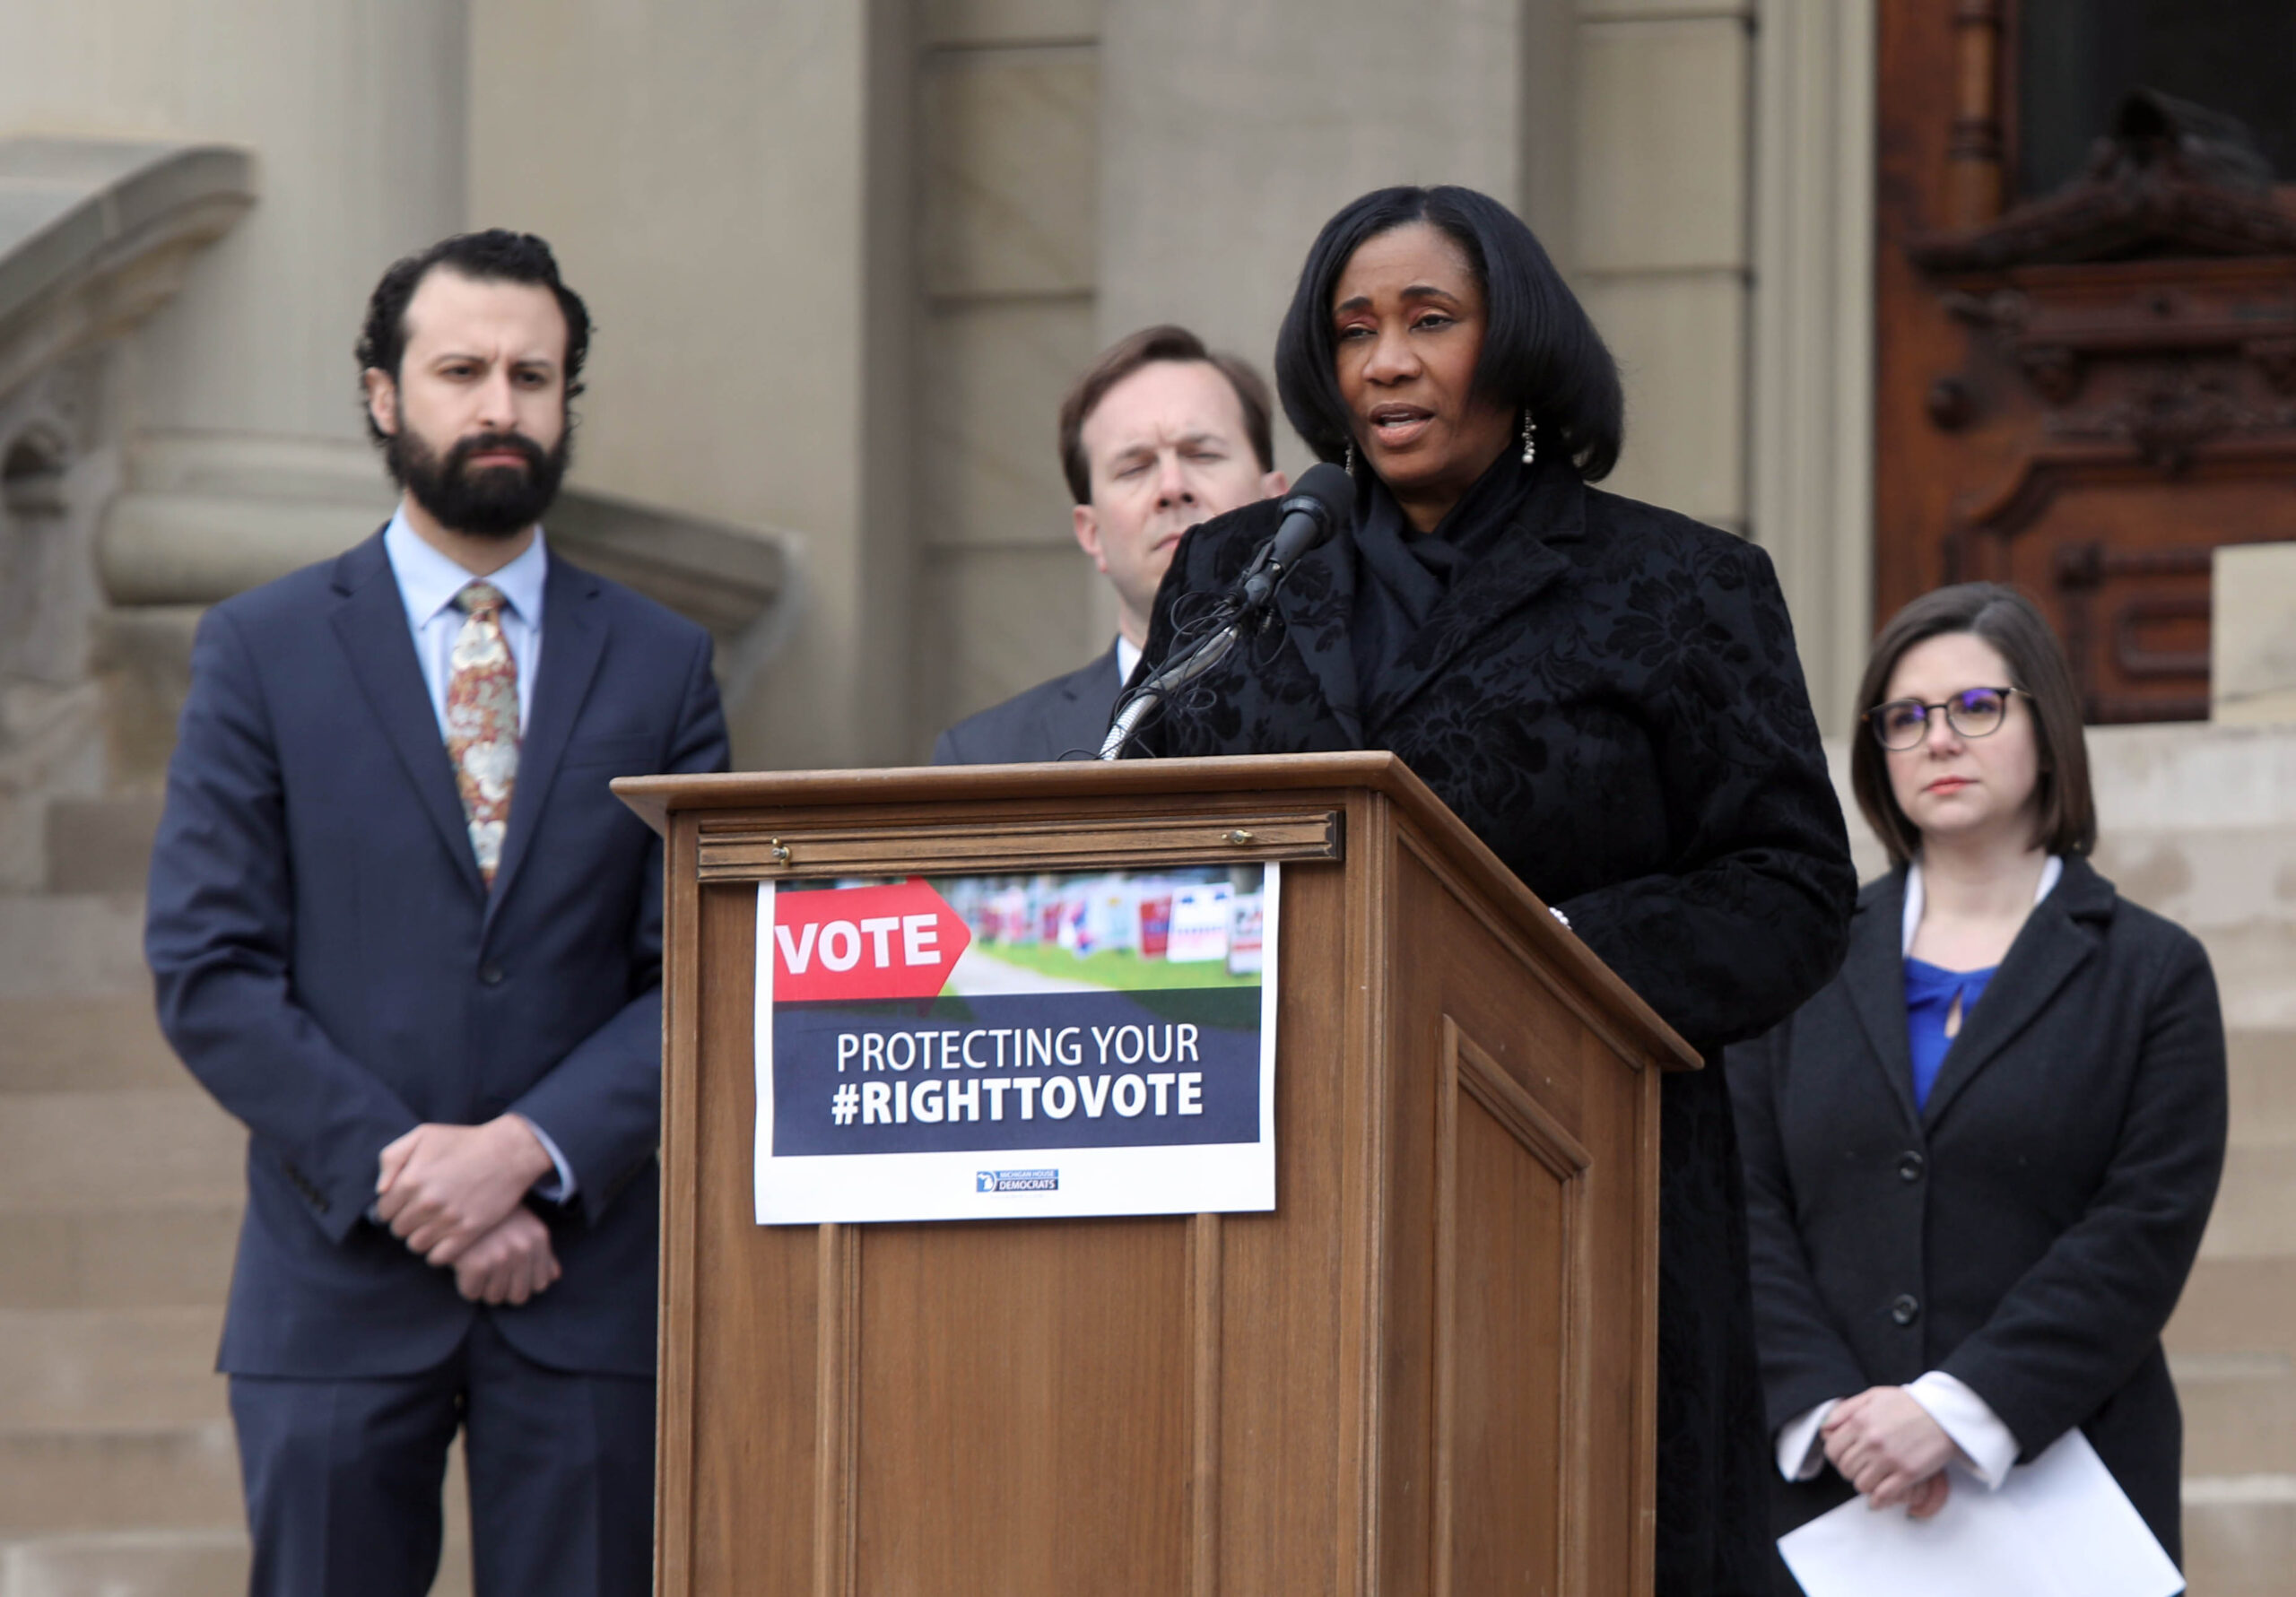 State Rep. Stephanie Young (D-Detroit) and members of the House Democratic Caucus held a press conference to announce another round of bills that protect the right to vote and take down unnecessary barriers between Michiganders and their franchise, on the Capitol steps on March 16, 2022.